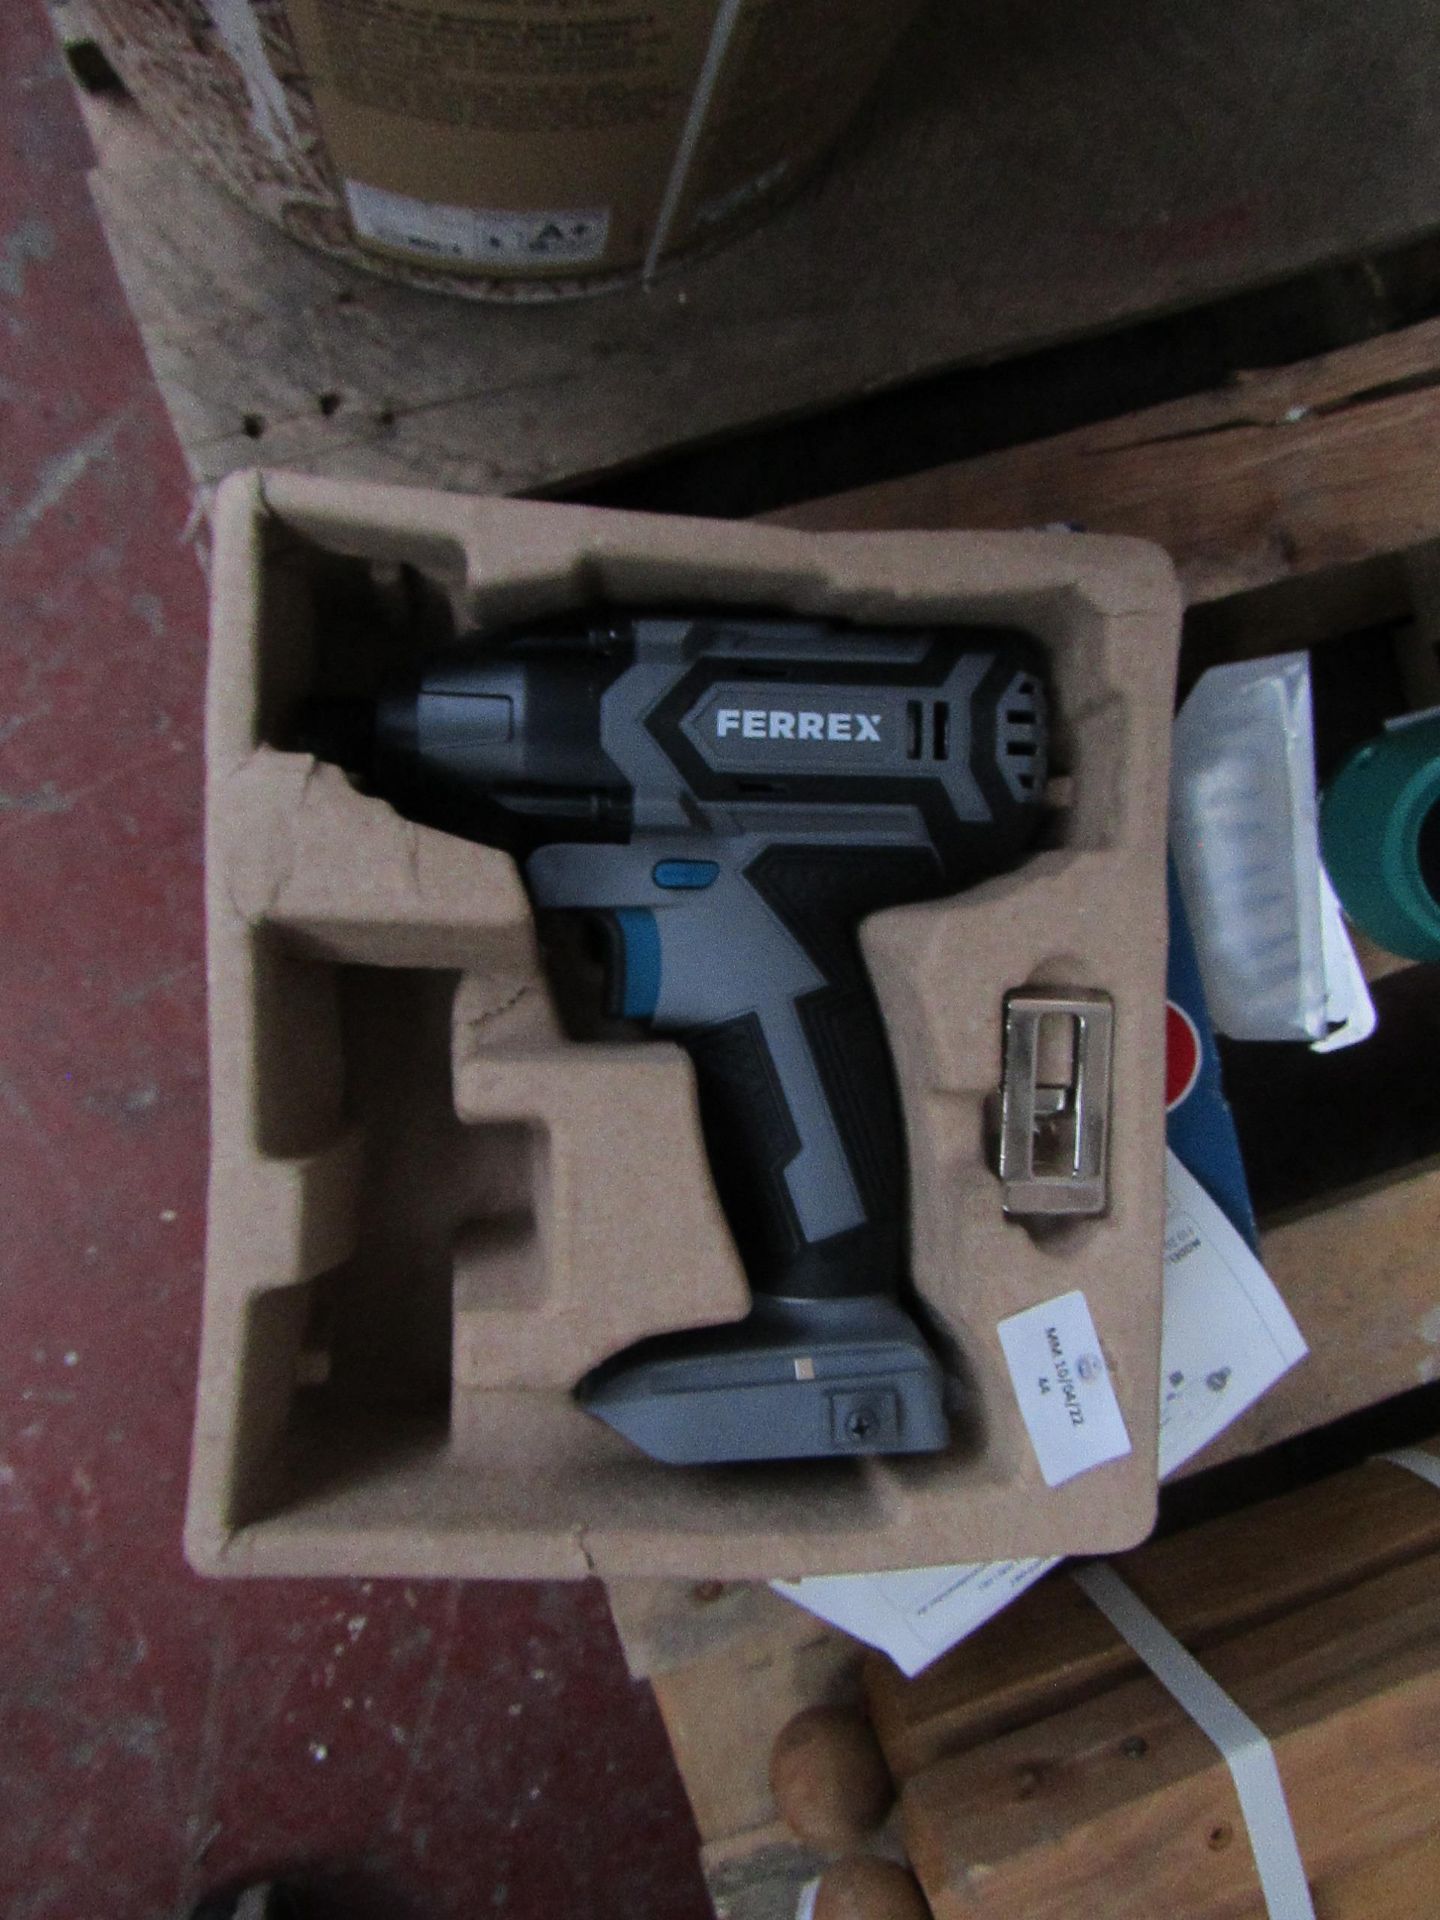 Ferrex 20v Cordless impact driver, missing battery and charger but looks new